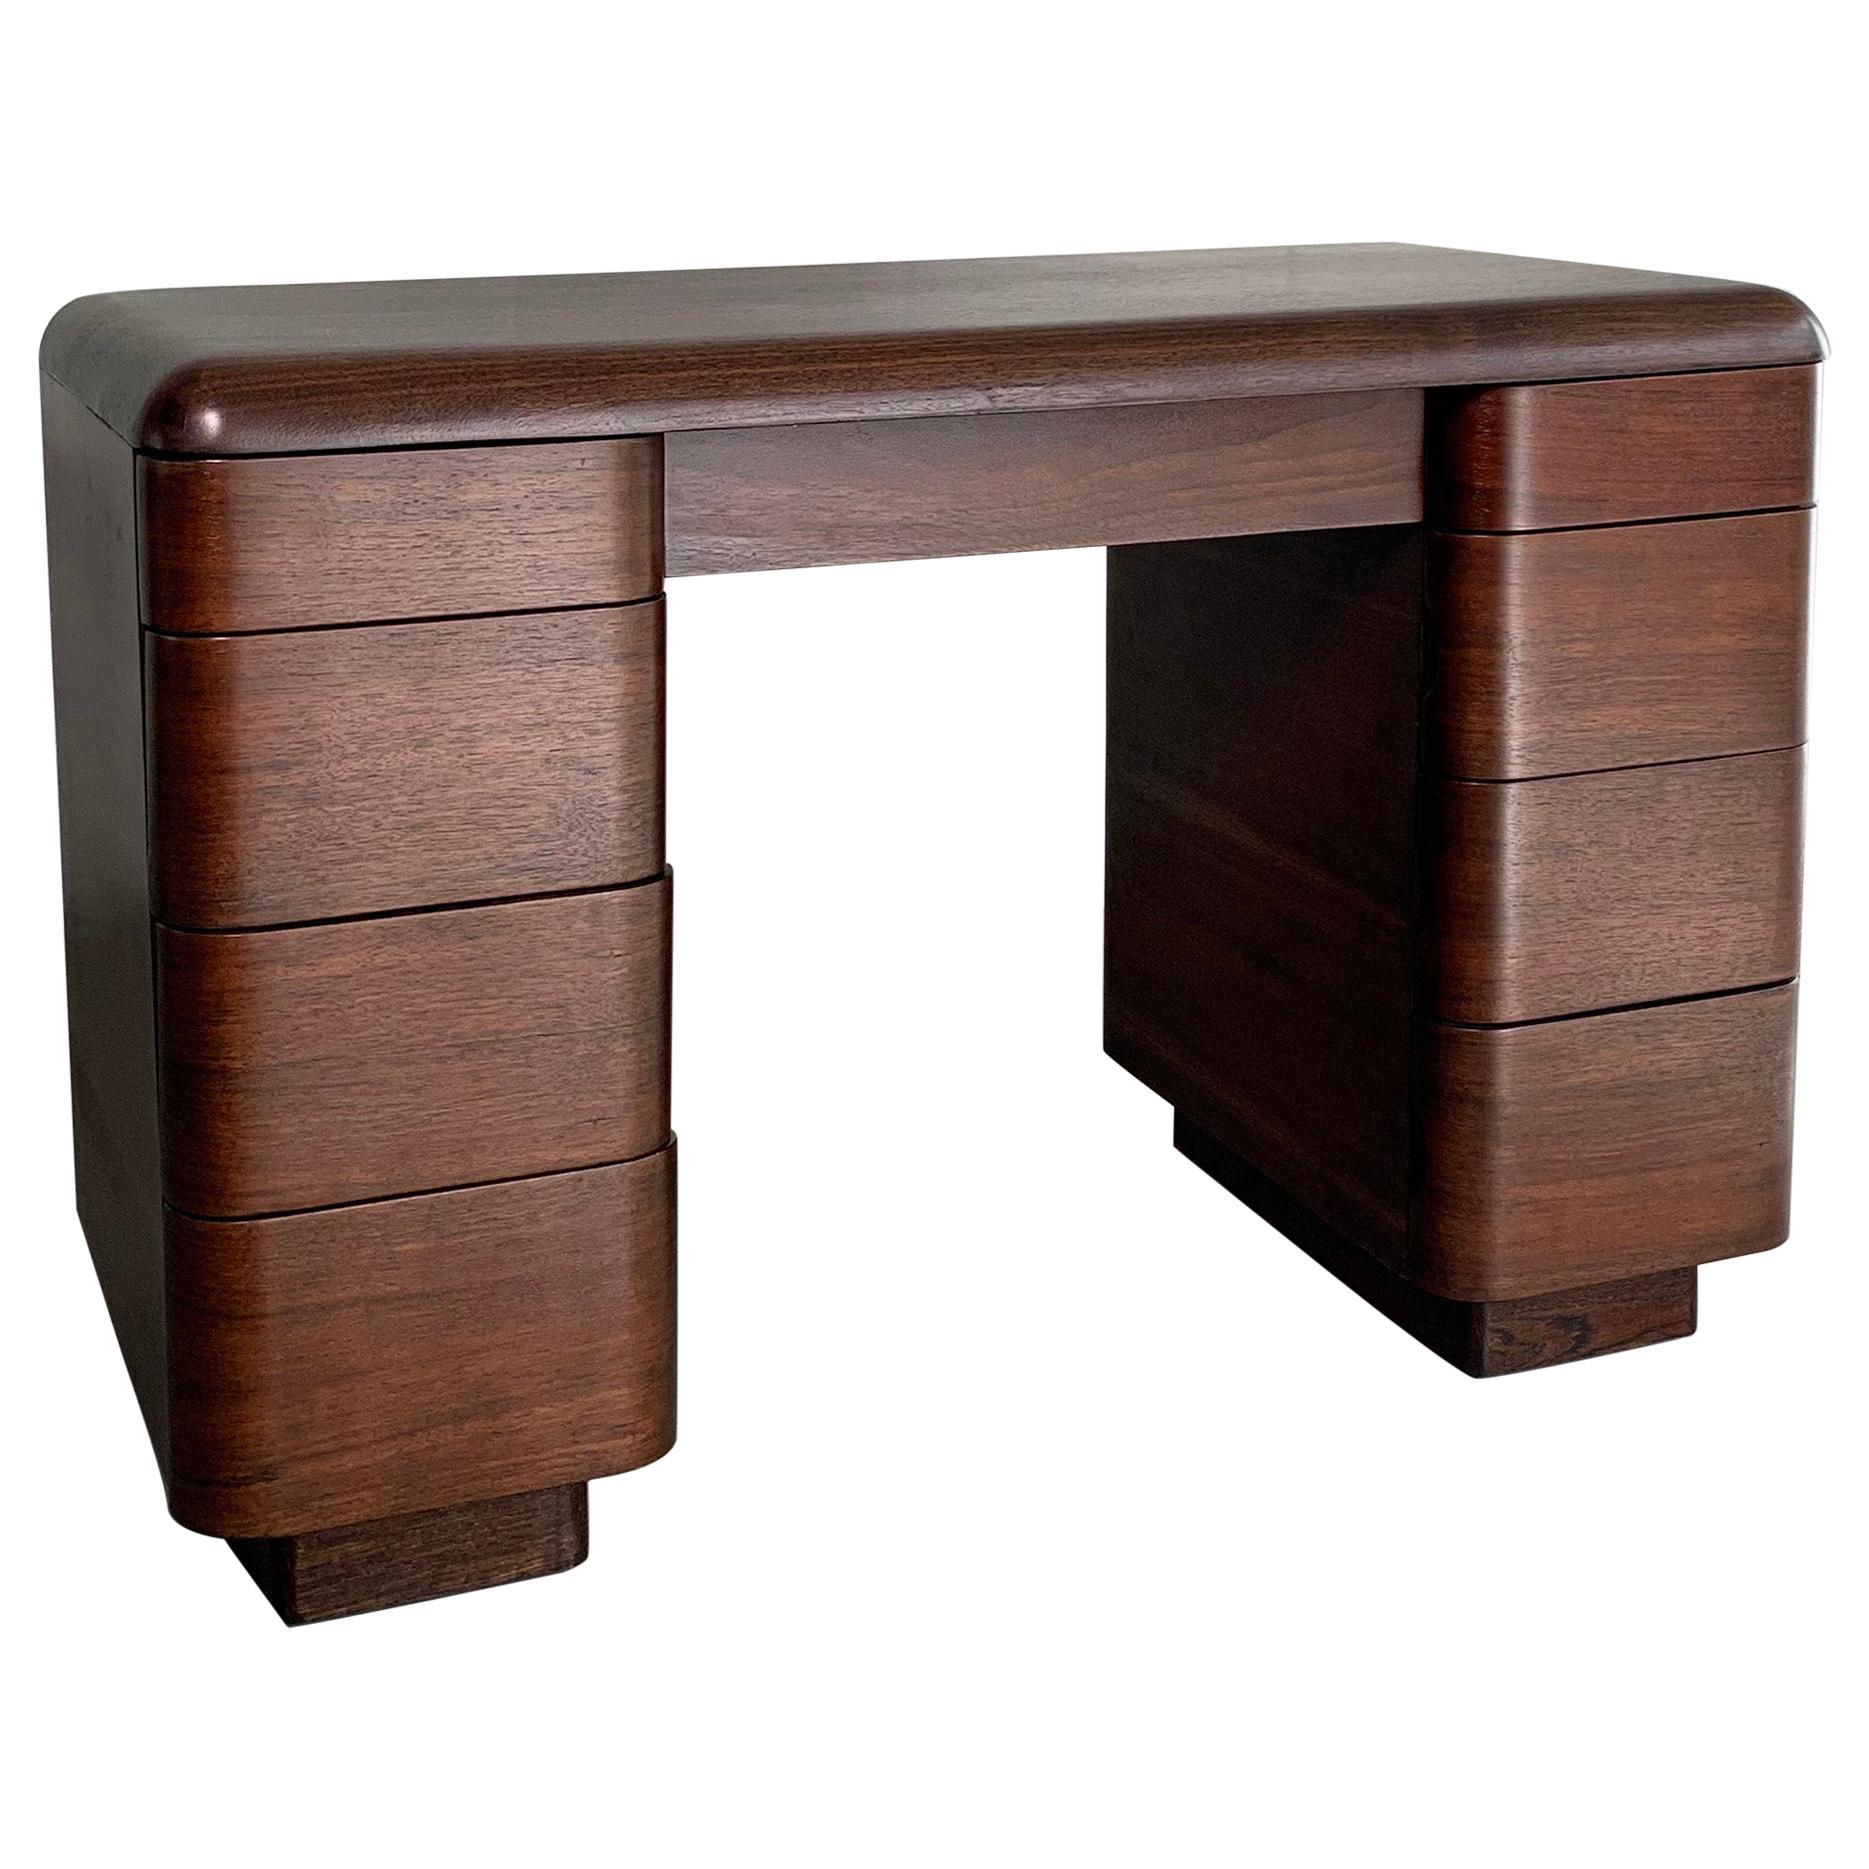 Bentwood Desk by Paul Goldman for Plymodern